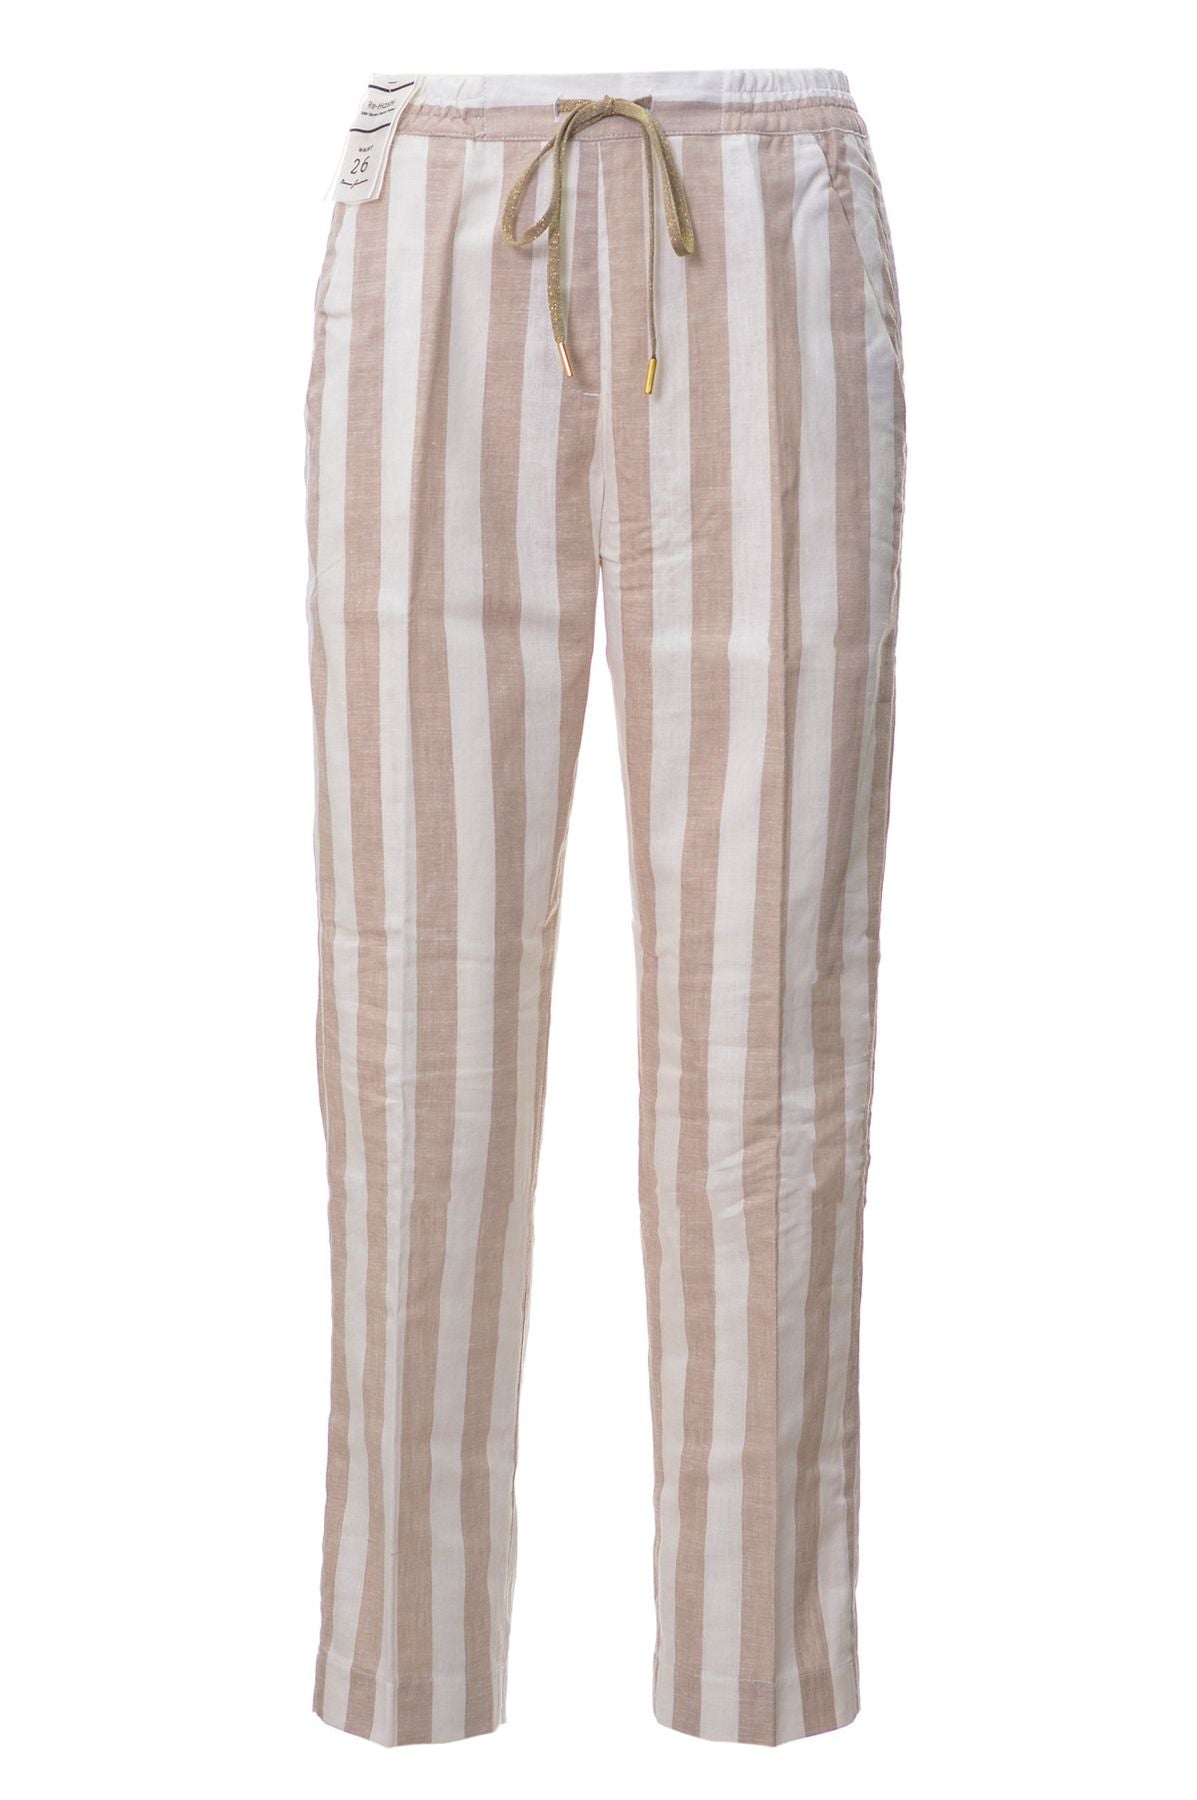 Re-HasH Spring/Summer Linen Trousers